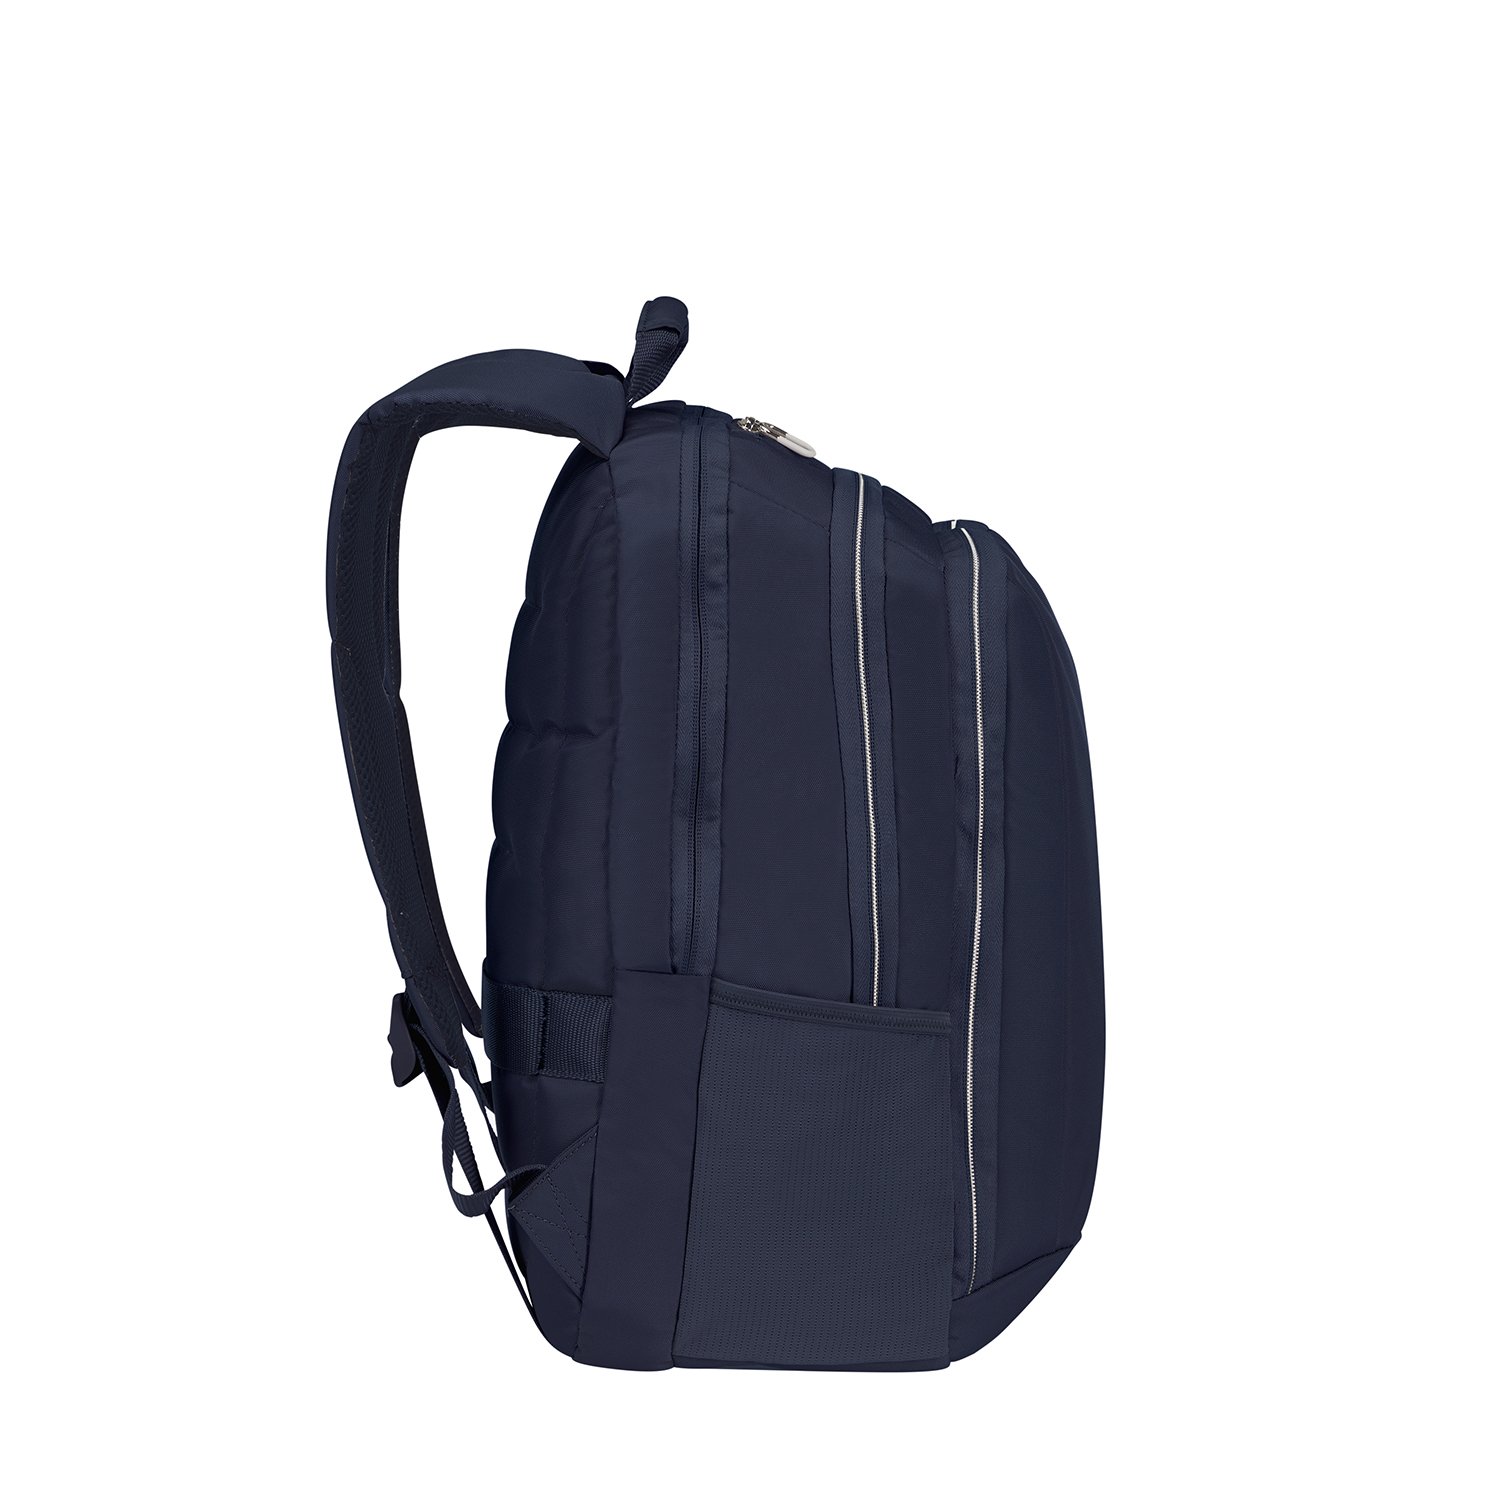 GUARDIT CLASSY-BACKPACK 15.6" SKH1-003-SF000*11